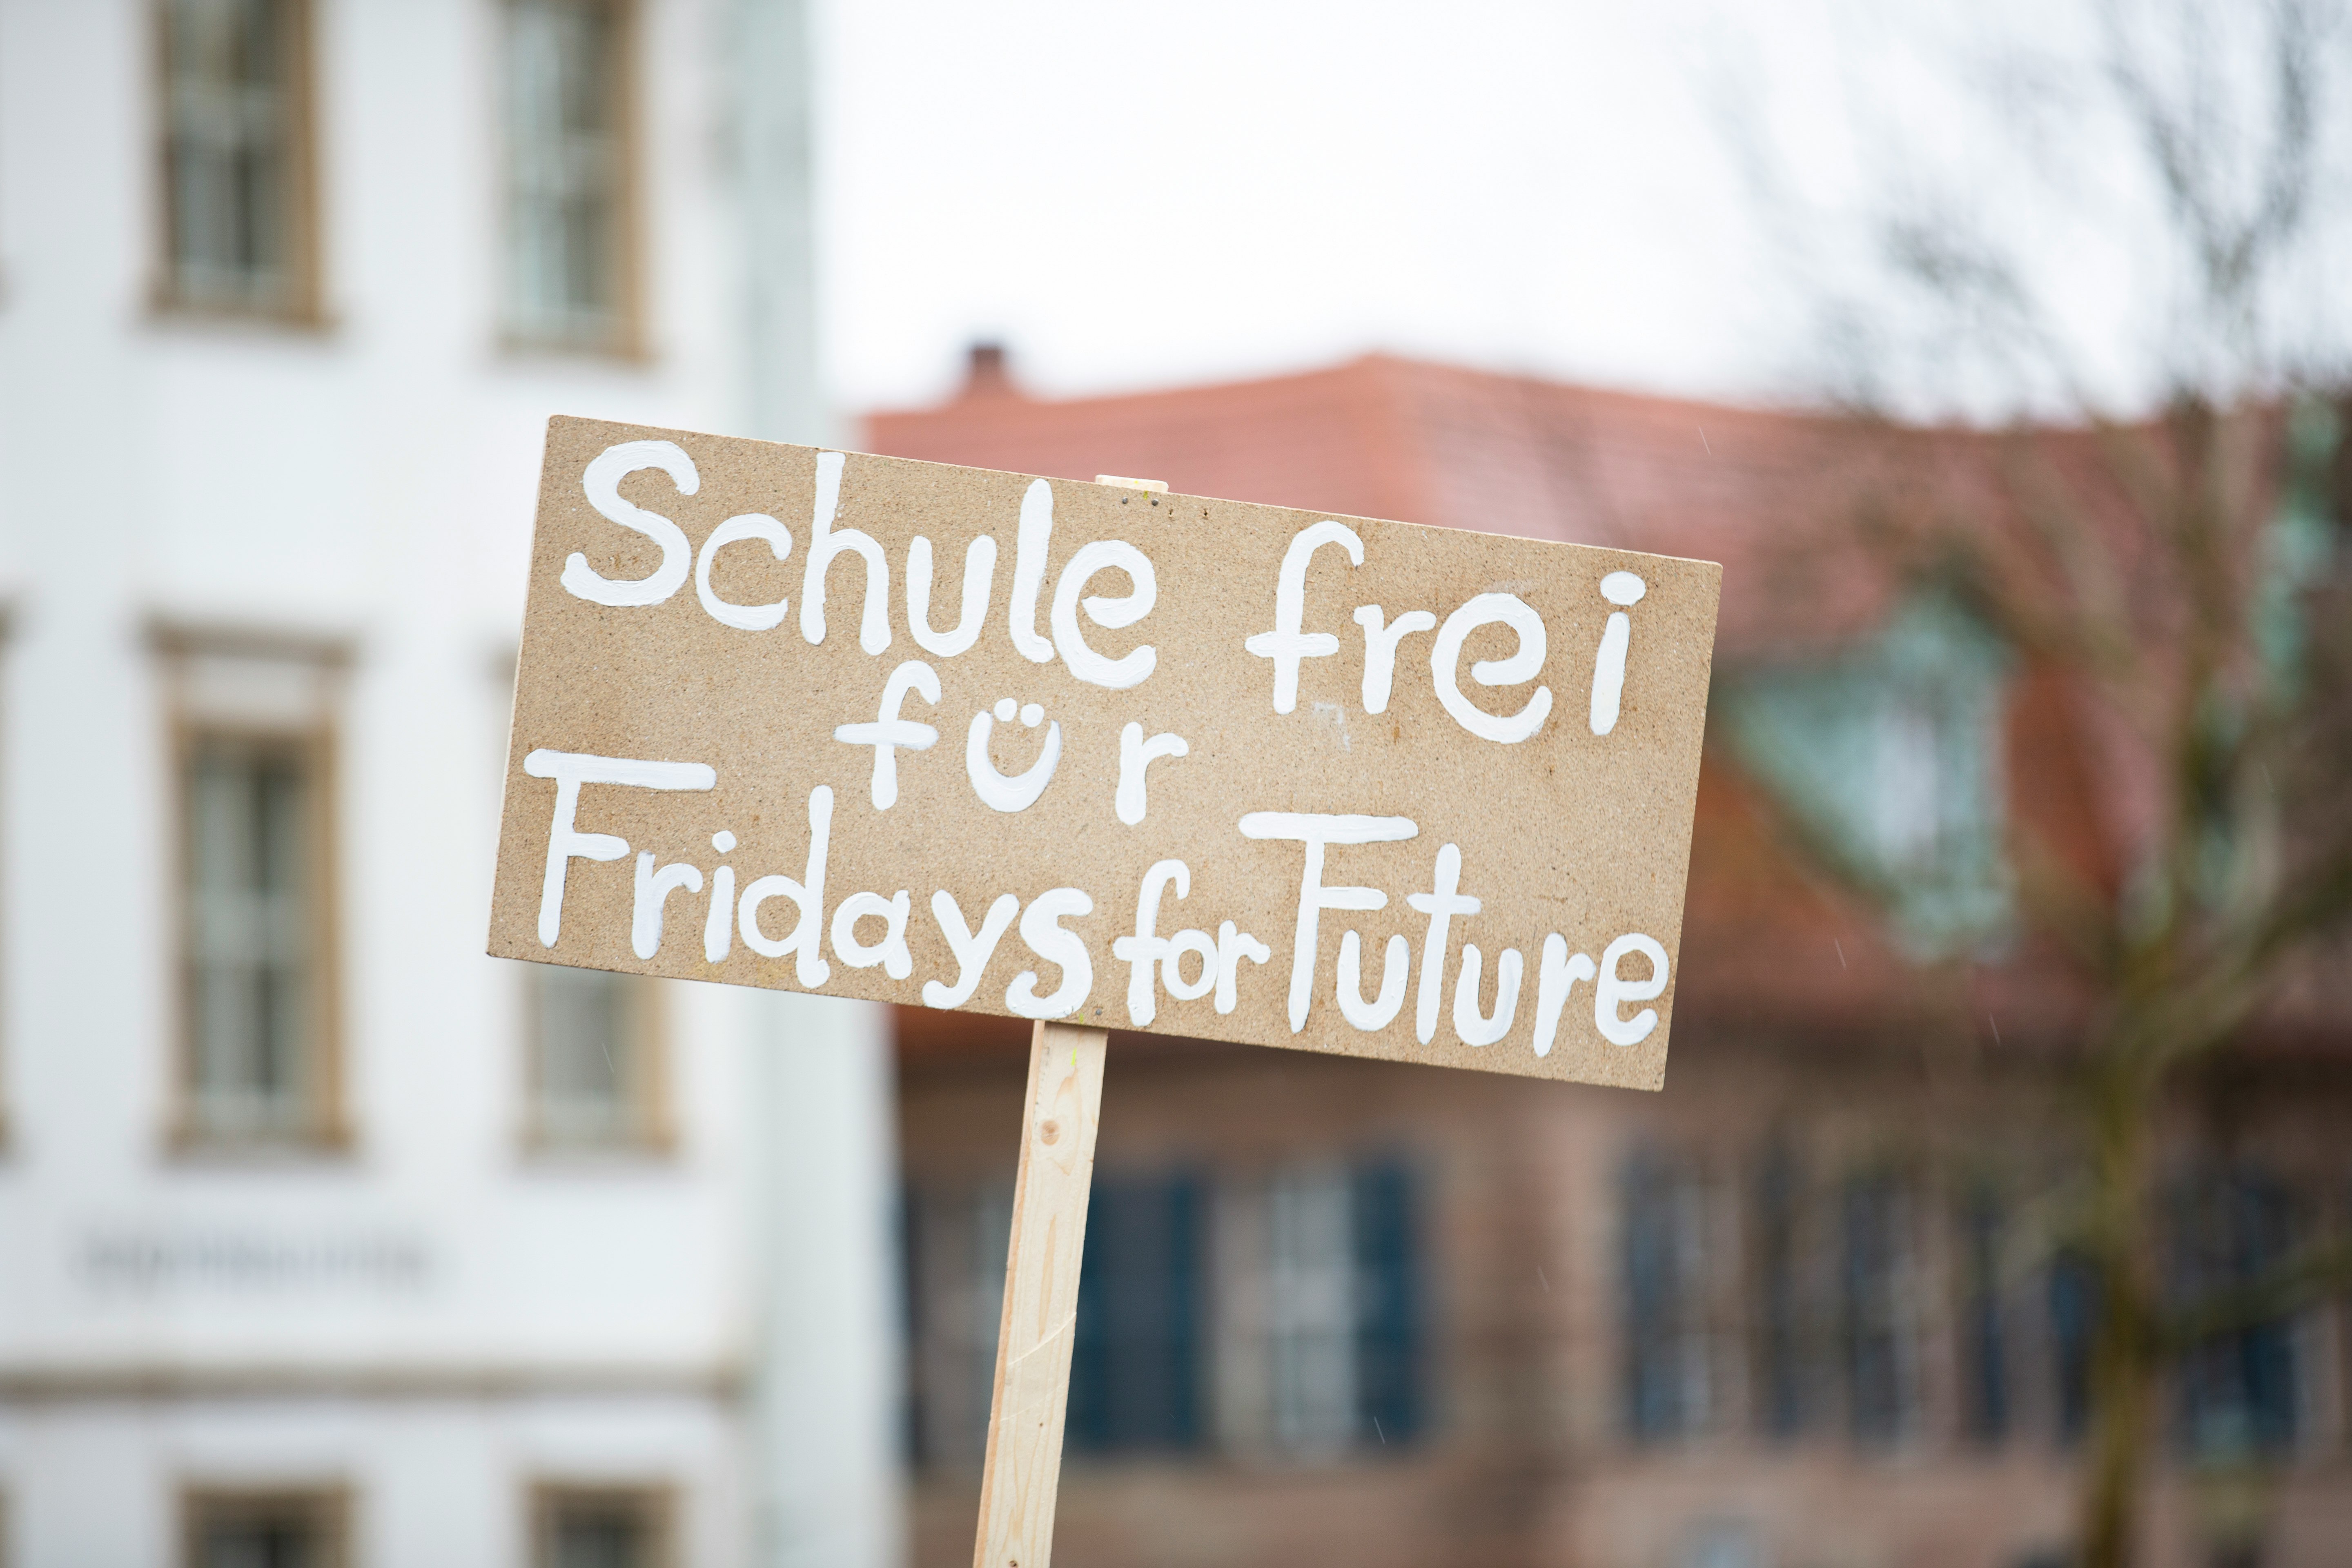 Save our Planet – Fridays for future (March 15 2019)